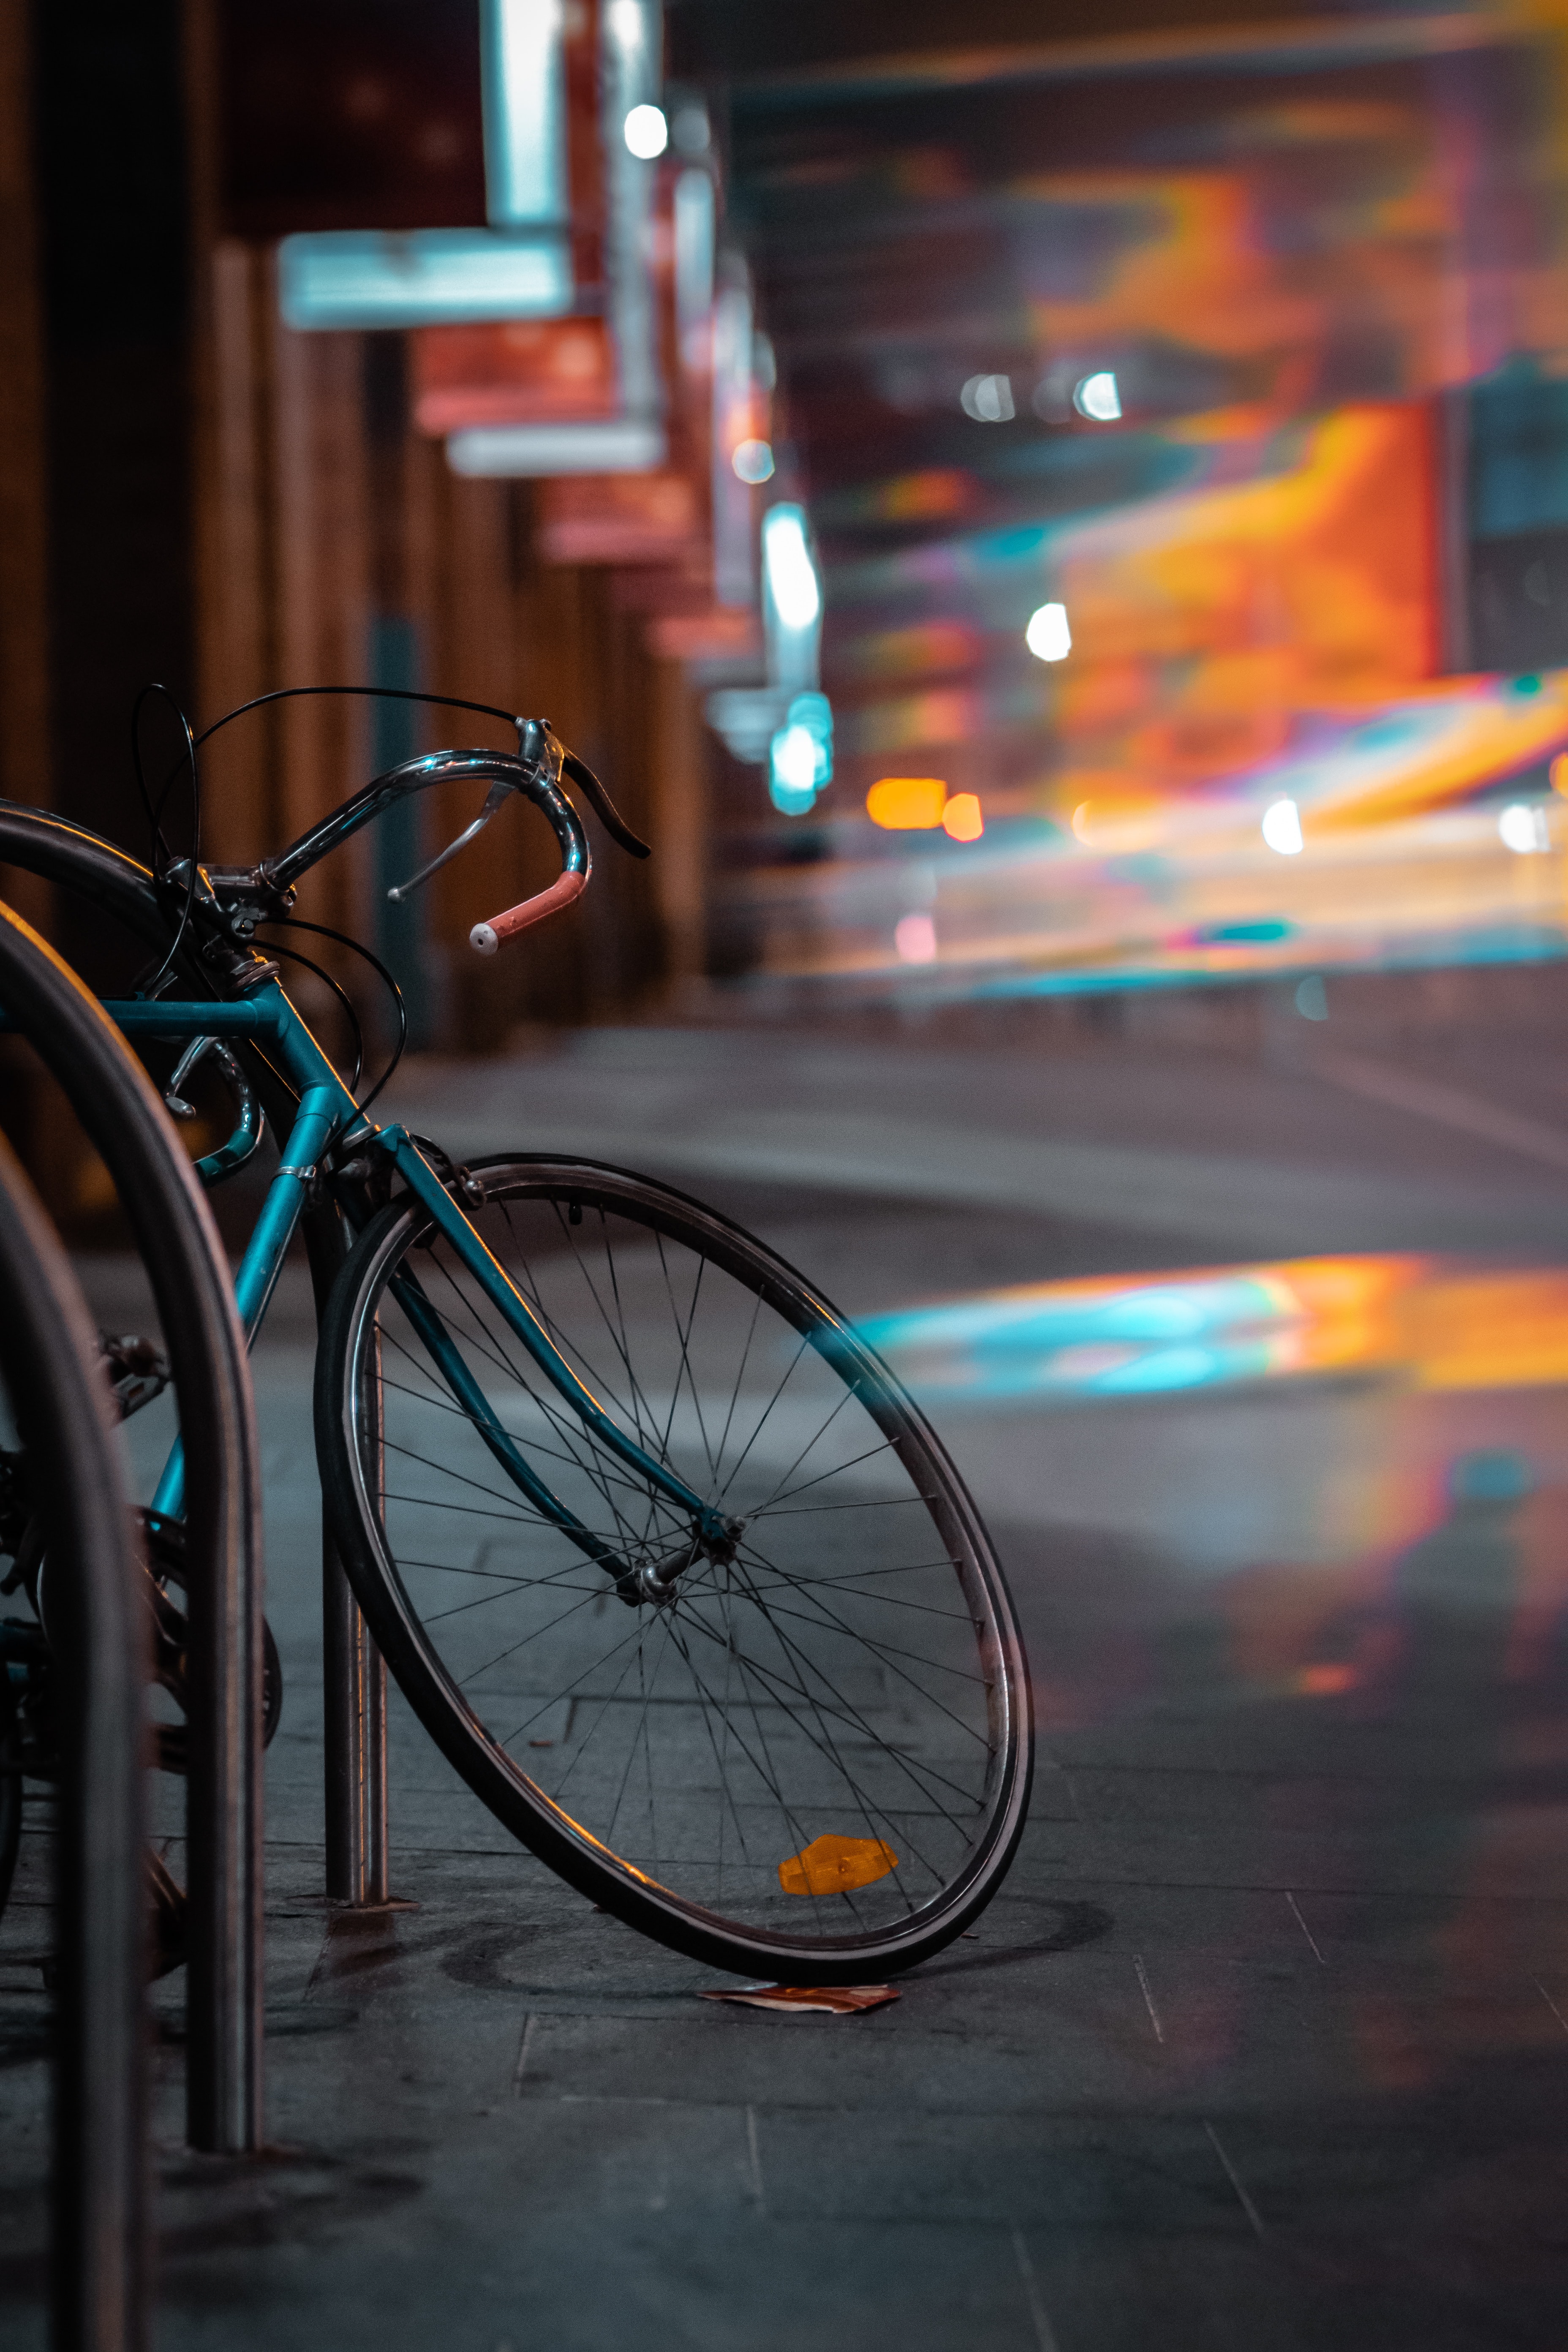 miscellaneous, blur, bicycle, transport, glare, miscellanea, smooth, evening, wheels